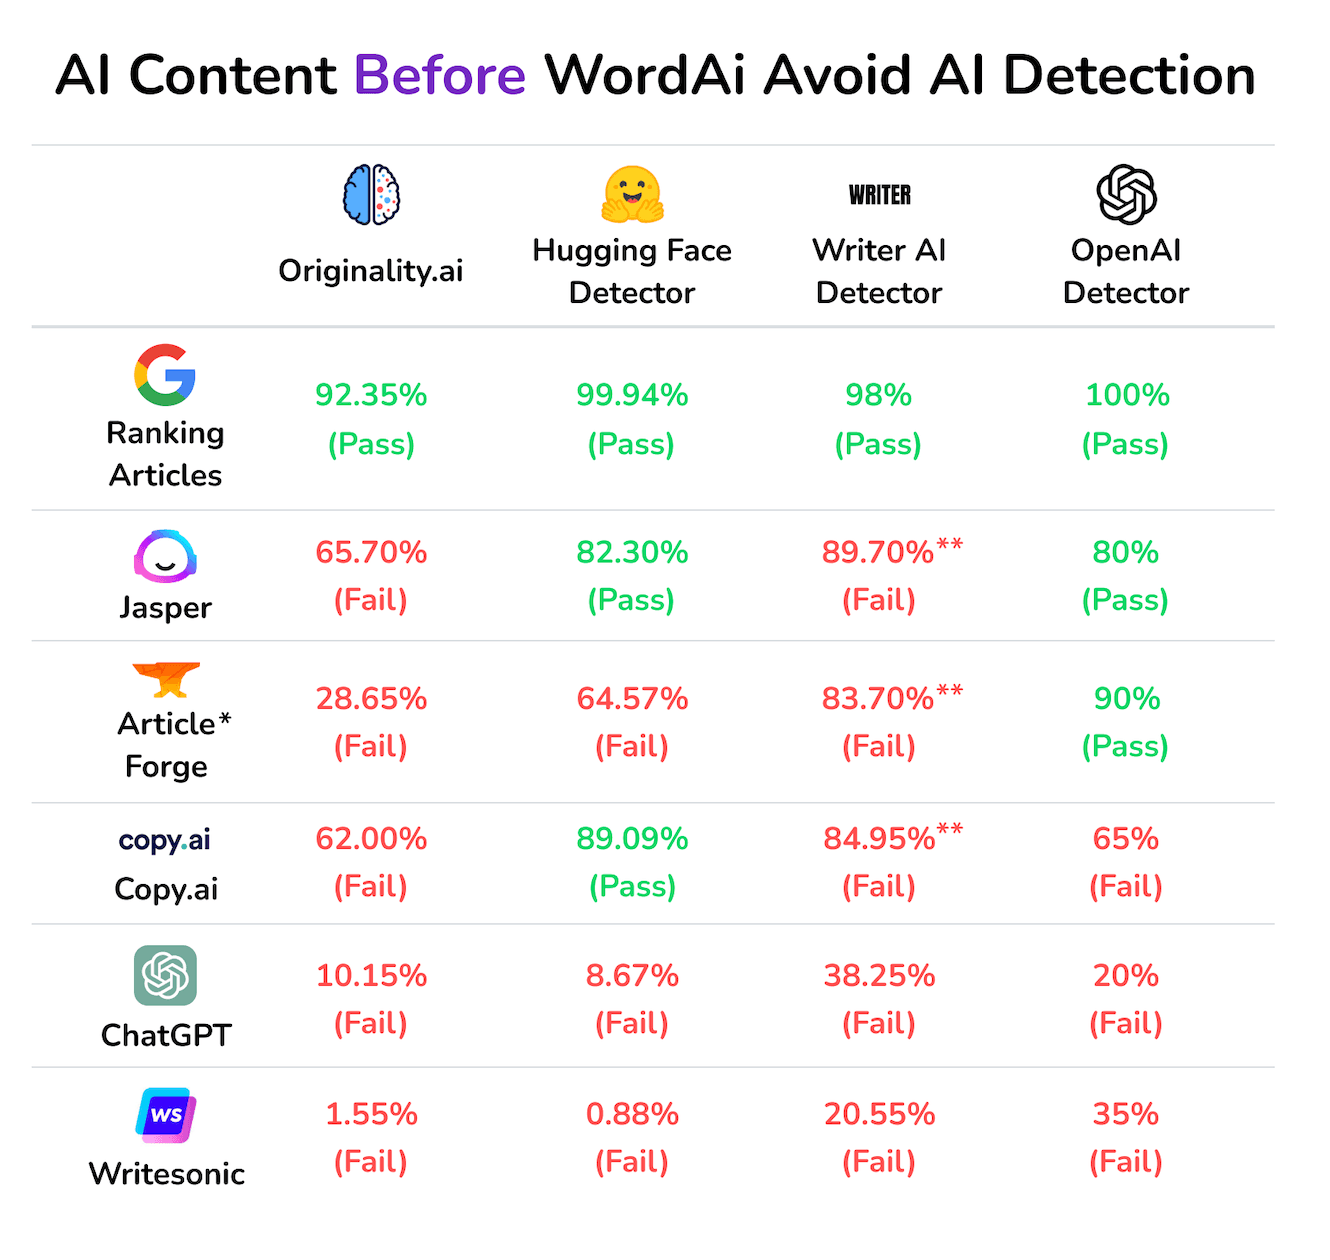 AI Content Detection Test Graphic from Word AI